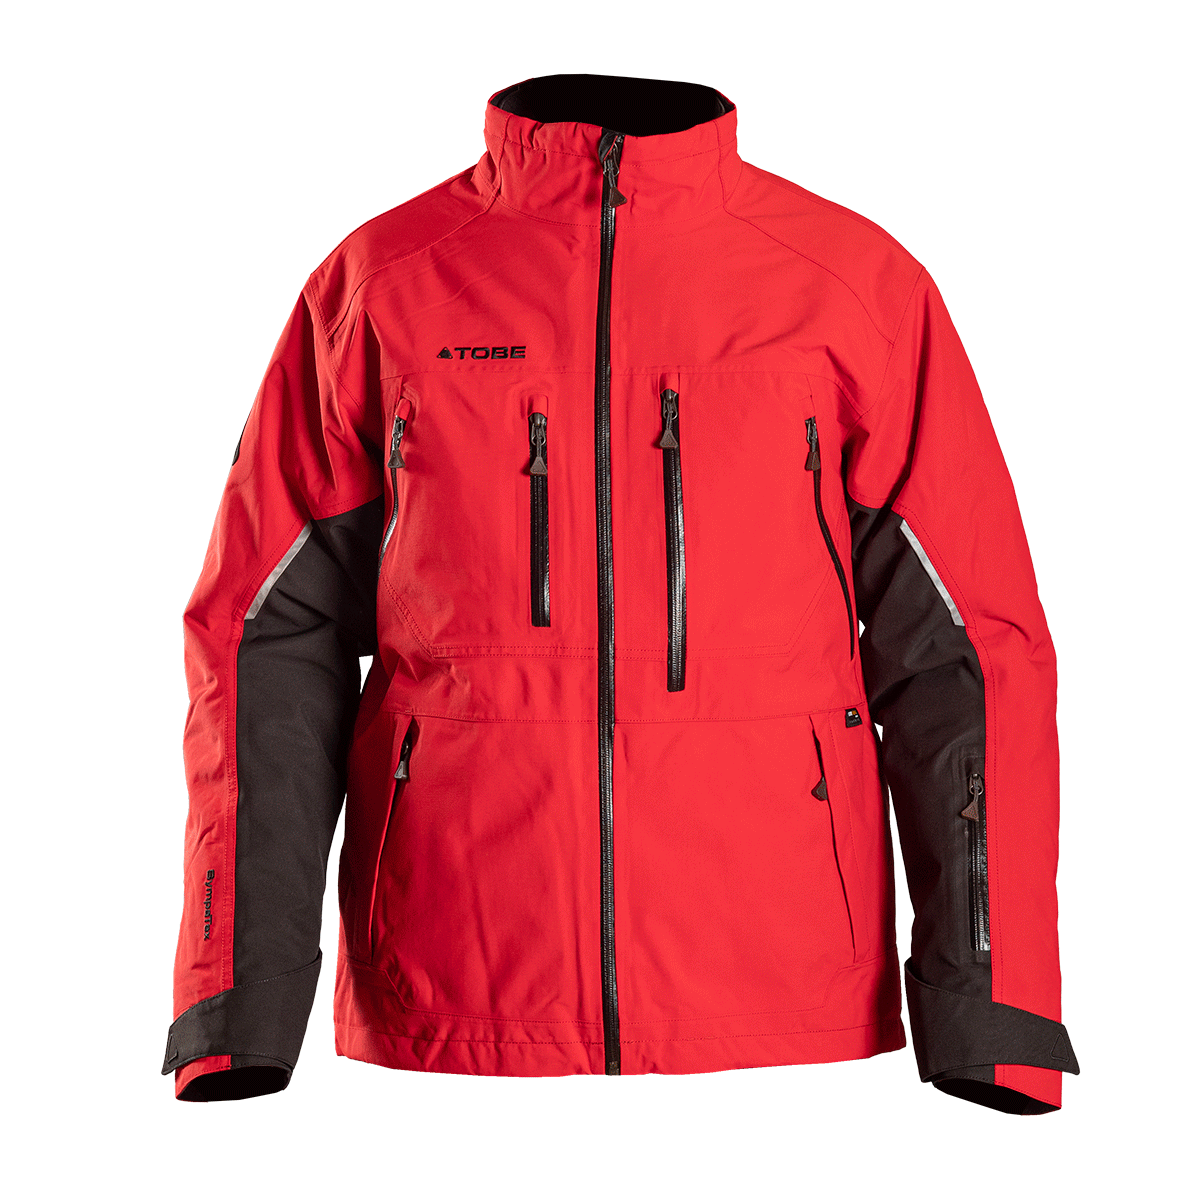 tobe jackets  iter v2 insulated - snowmobile